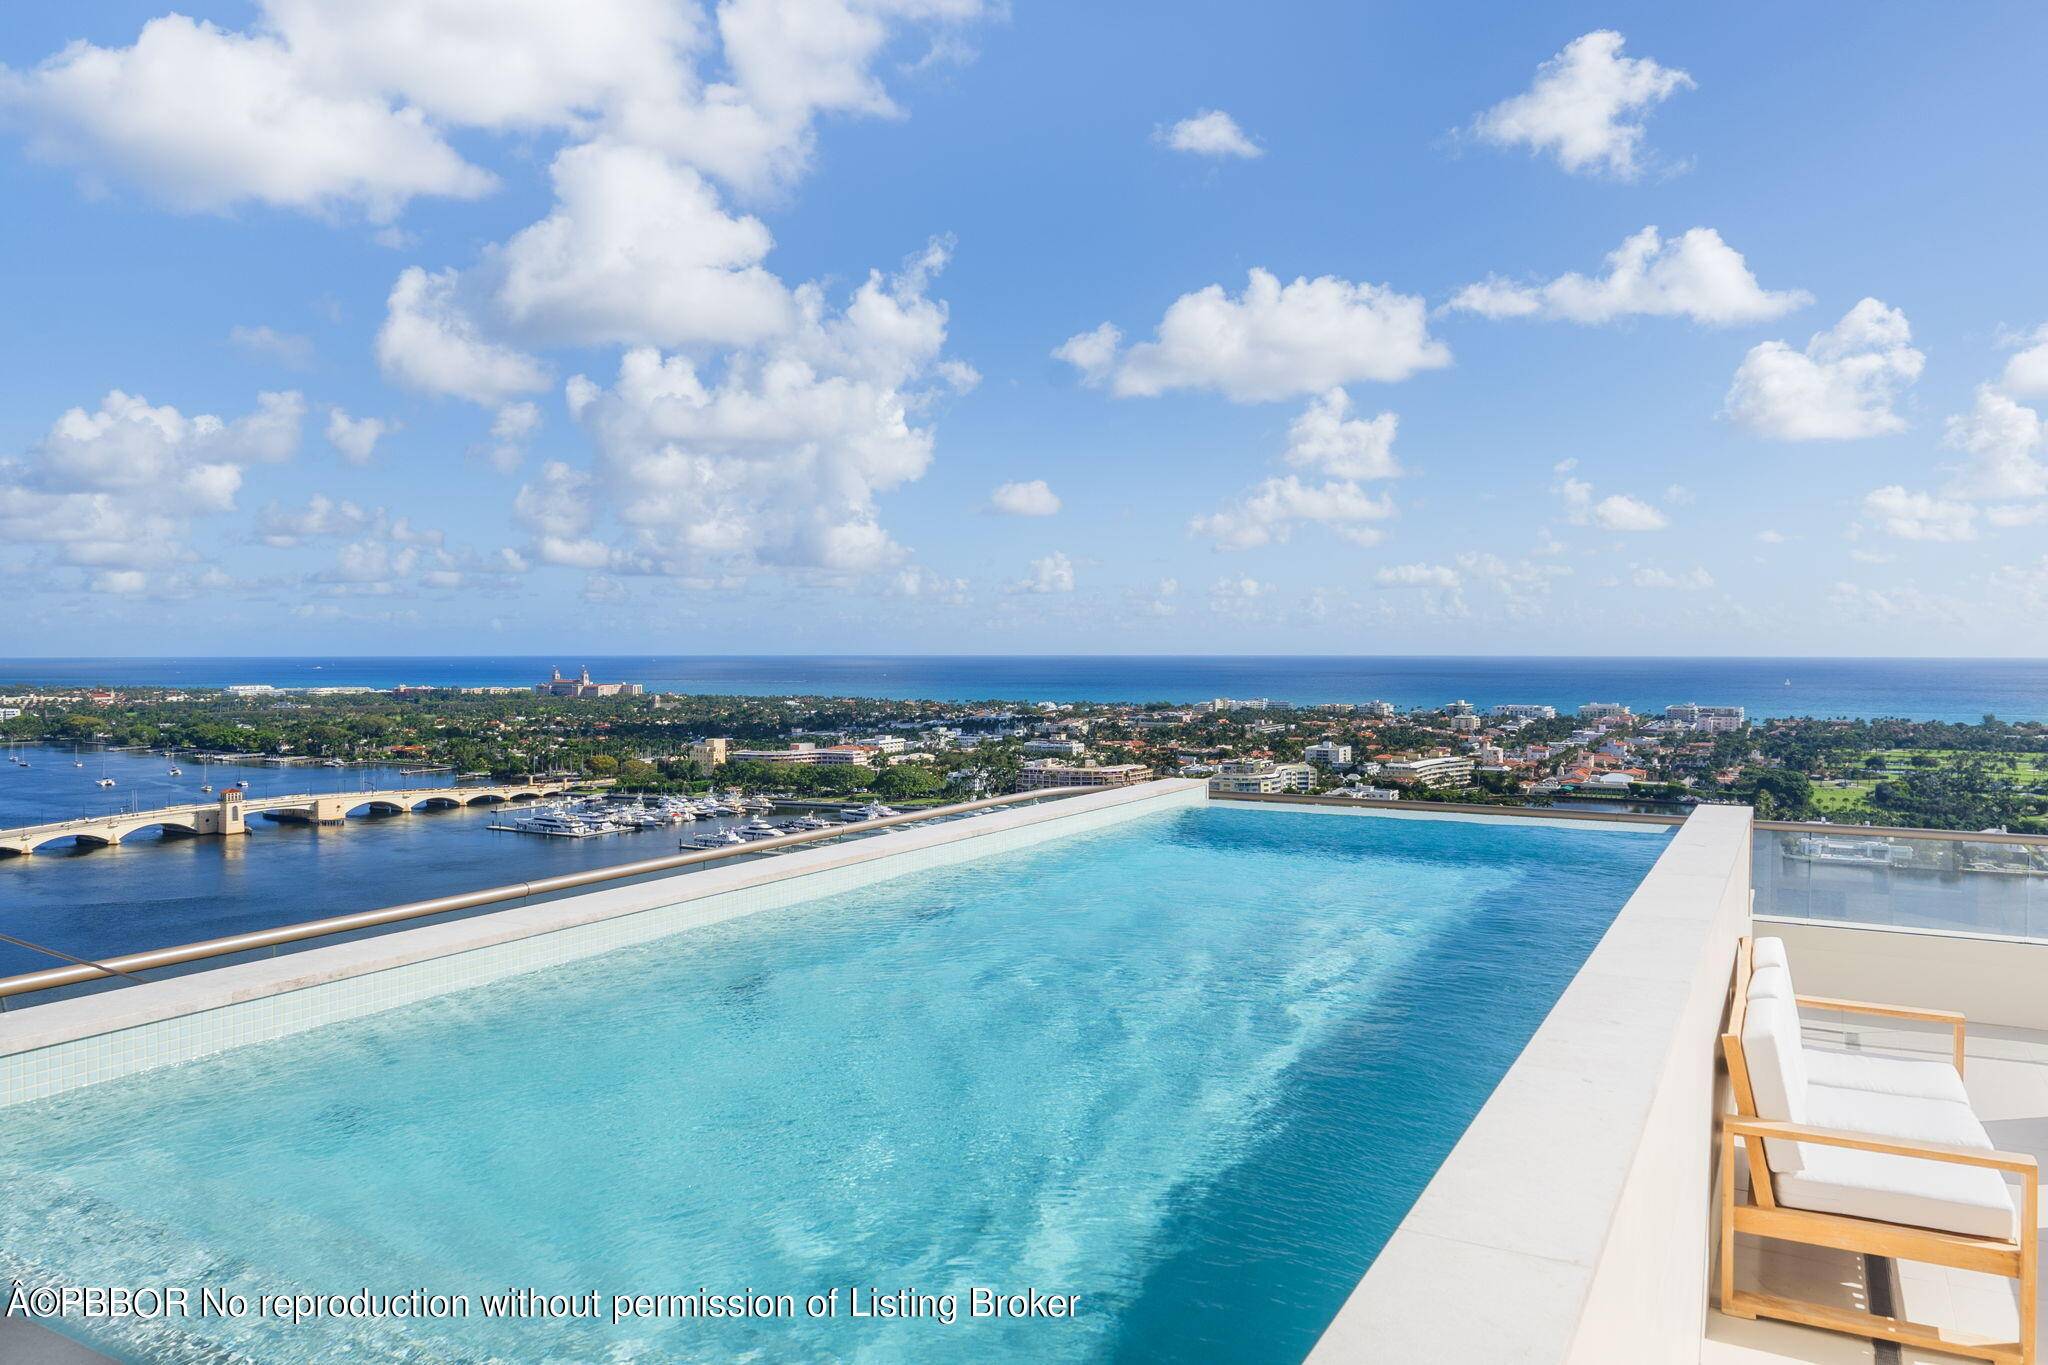 Live in the sky in your own 11, 000sf full floor Penthouse atop La Clara Palm Beach.